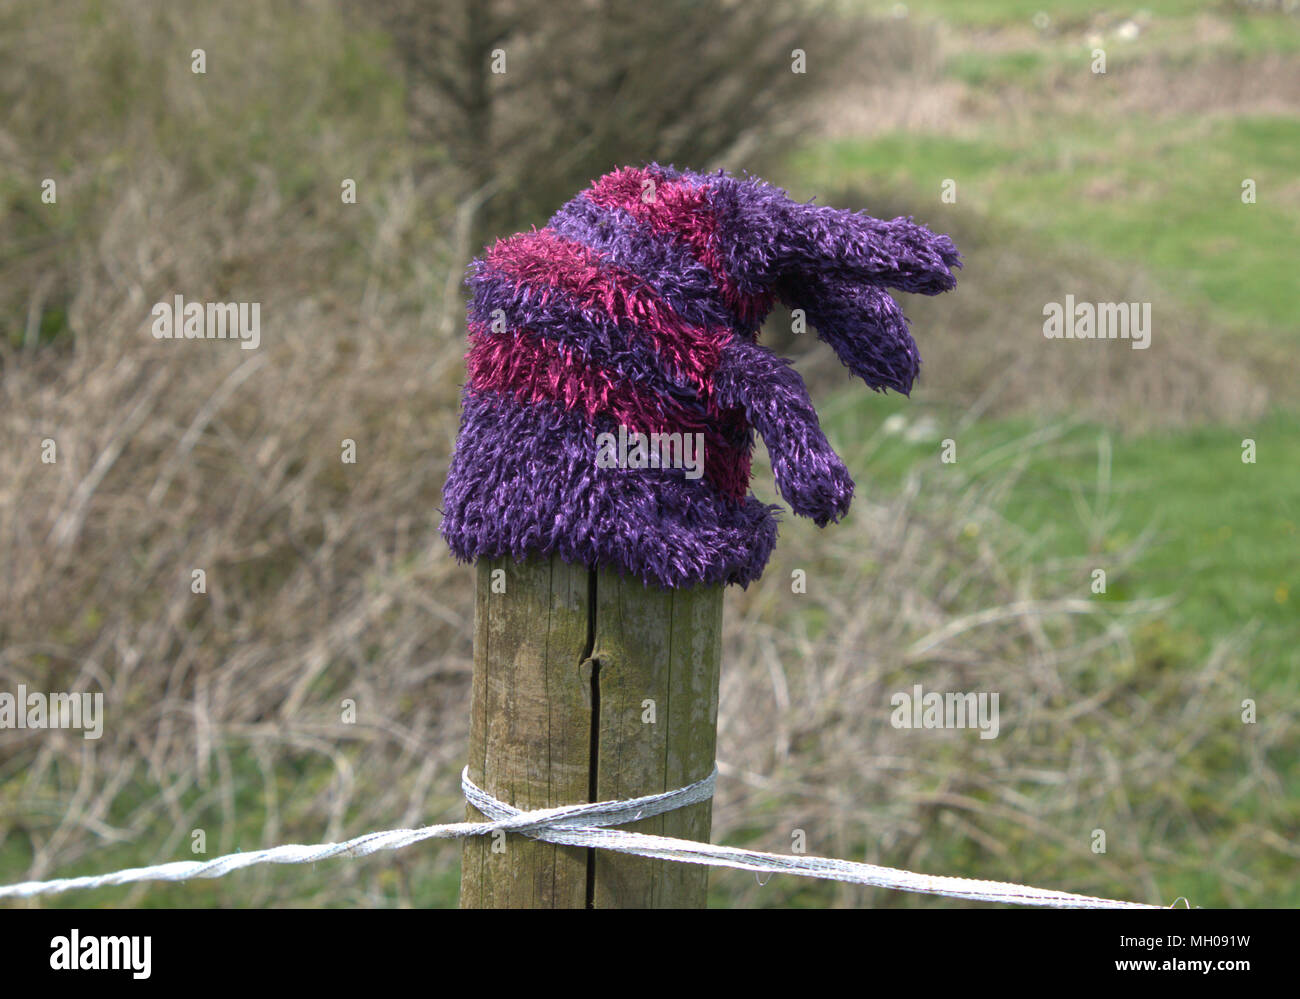 lost purple and pink striped woollen glove pulled over the top of a farm fence post. Stock Photo